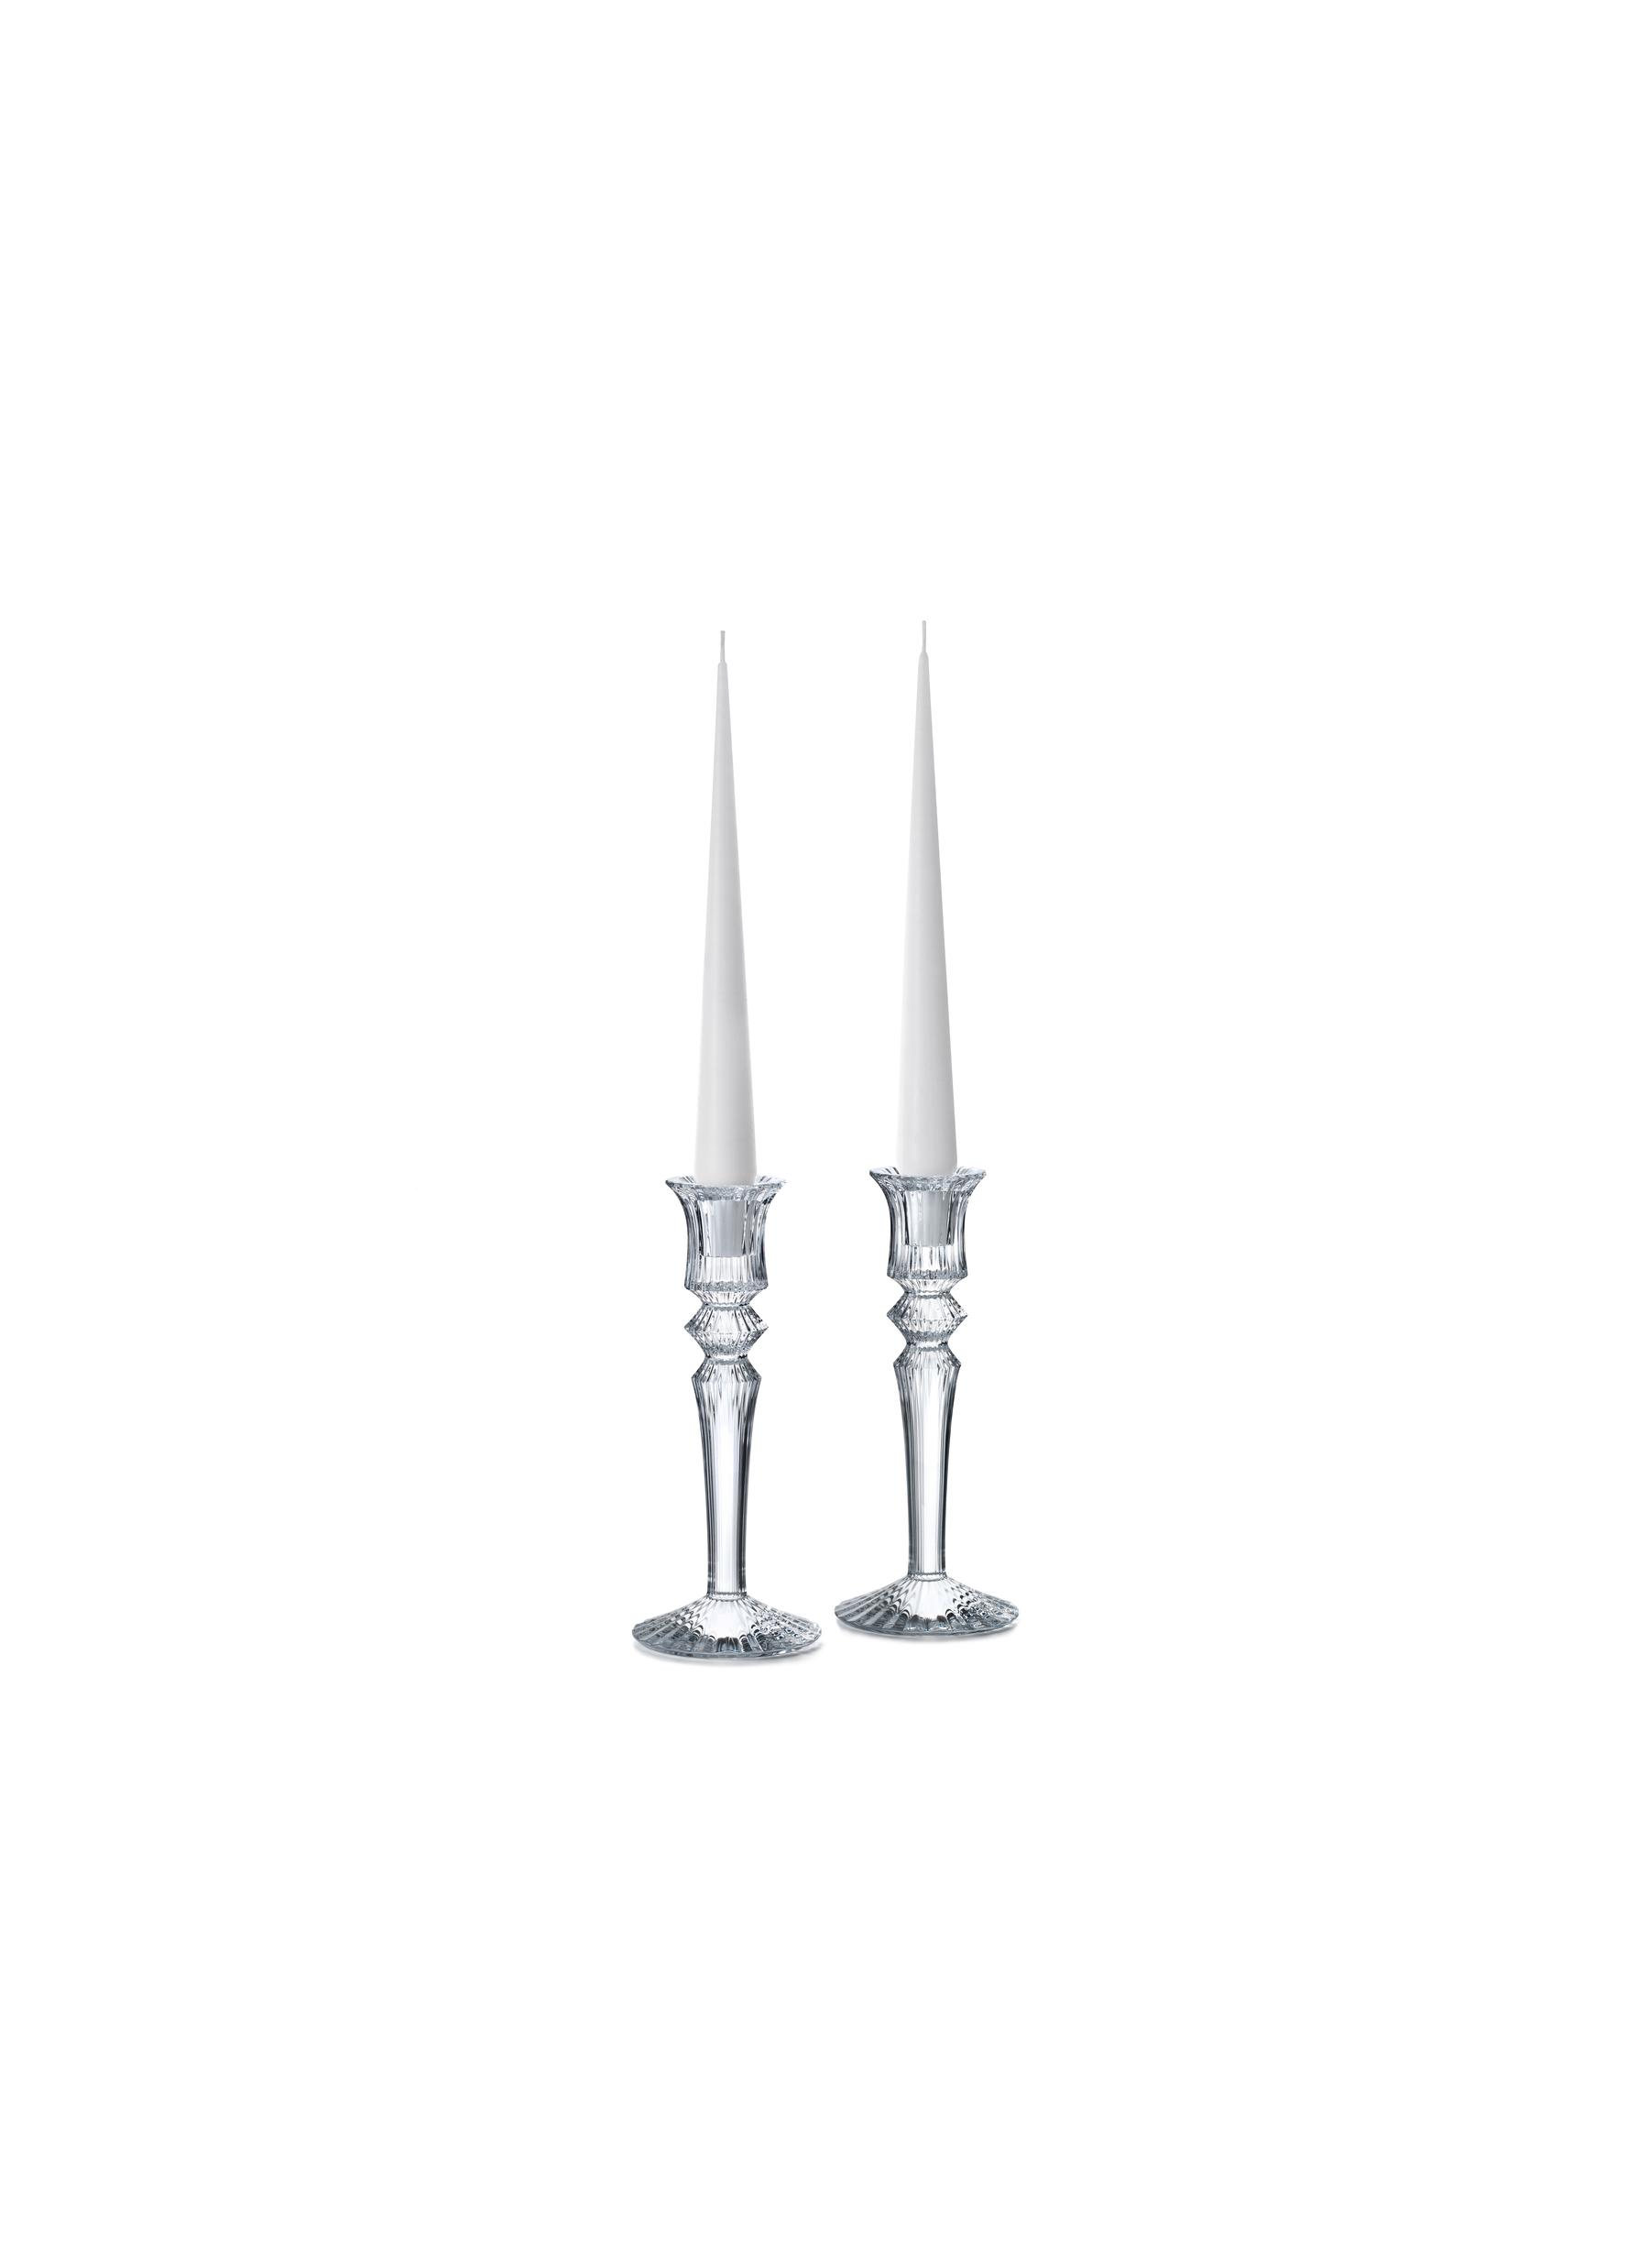 Mille Nuits Candlestick Set of 2